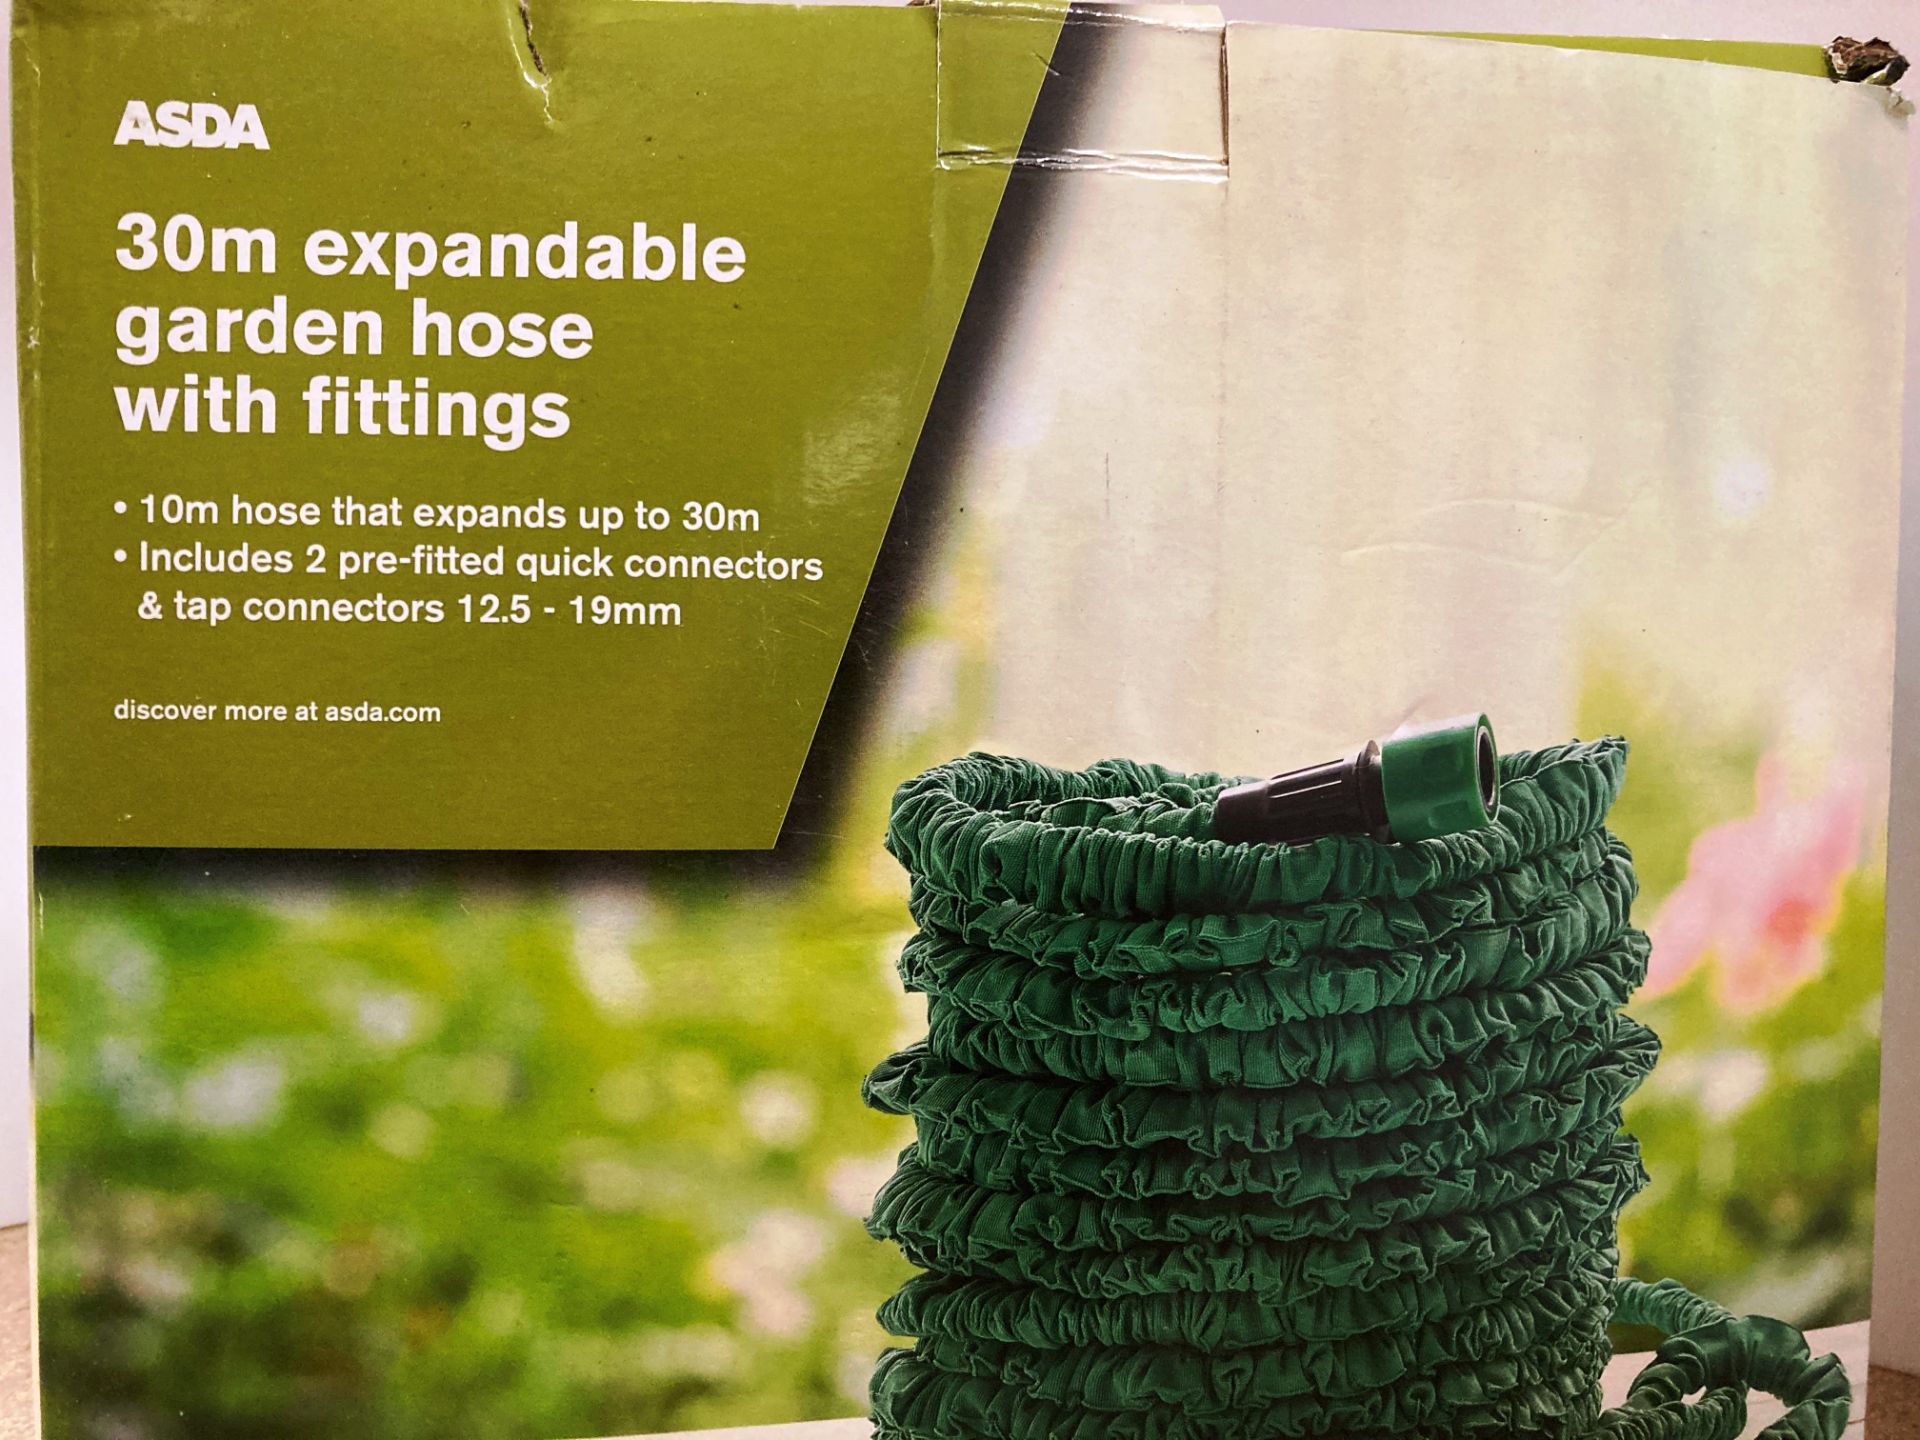 4 x 30m expandable garden hoses with fitting by Asda (boxed)